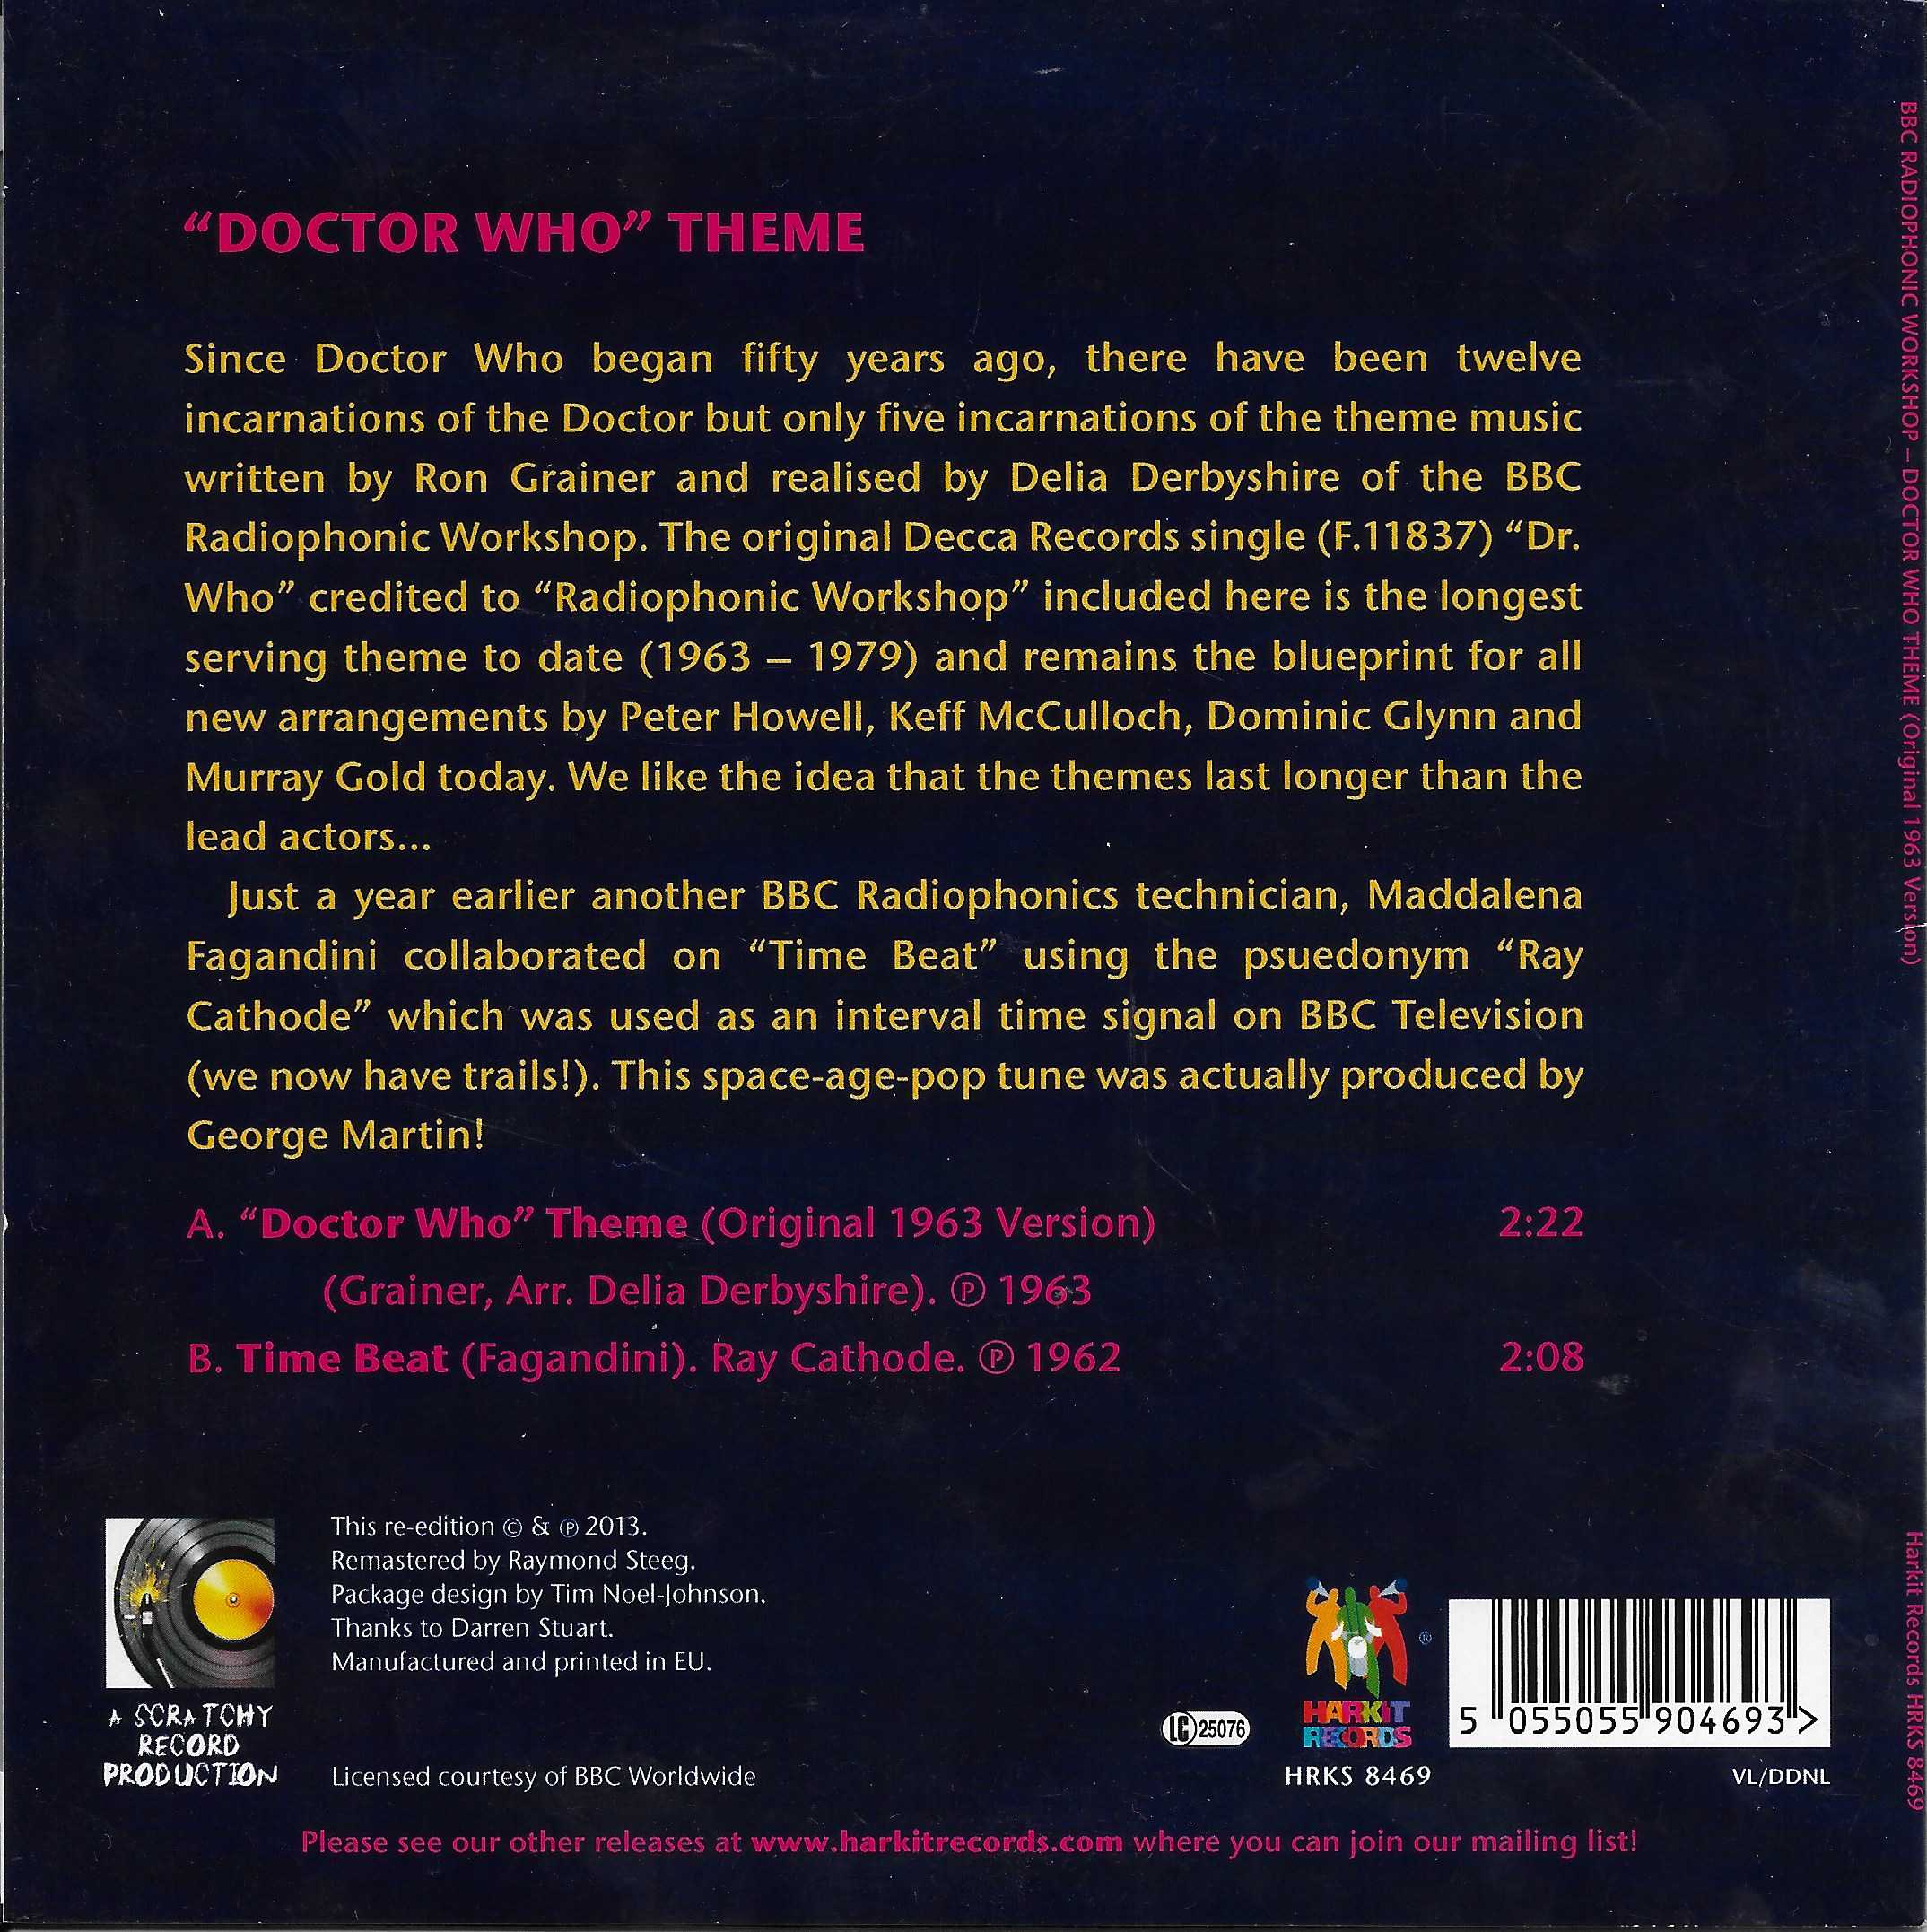 Picture of HRKS 8469 Doctor Who - 50th anniversary edition by artist Ron Grainer / Arr. Delia Derbyshire / Fagandini from the BBC records and Tapes library